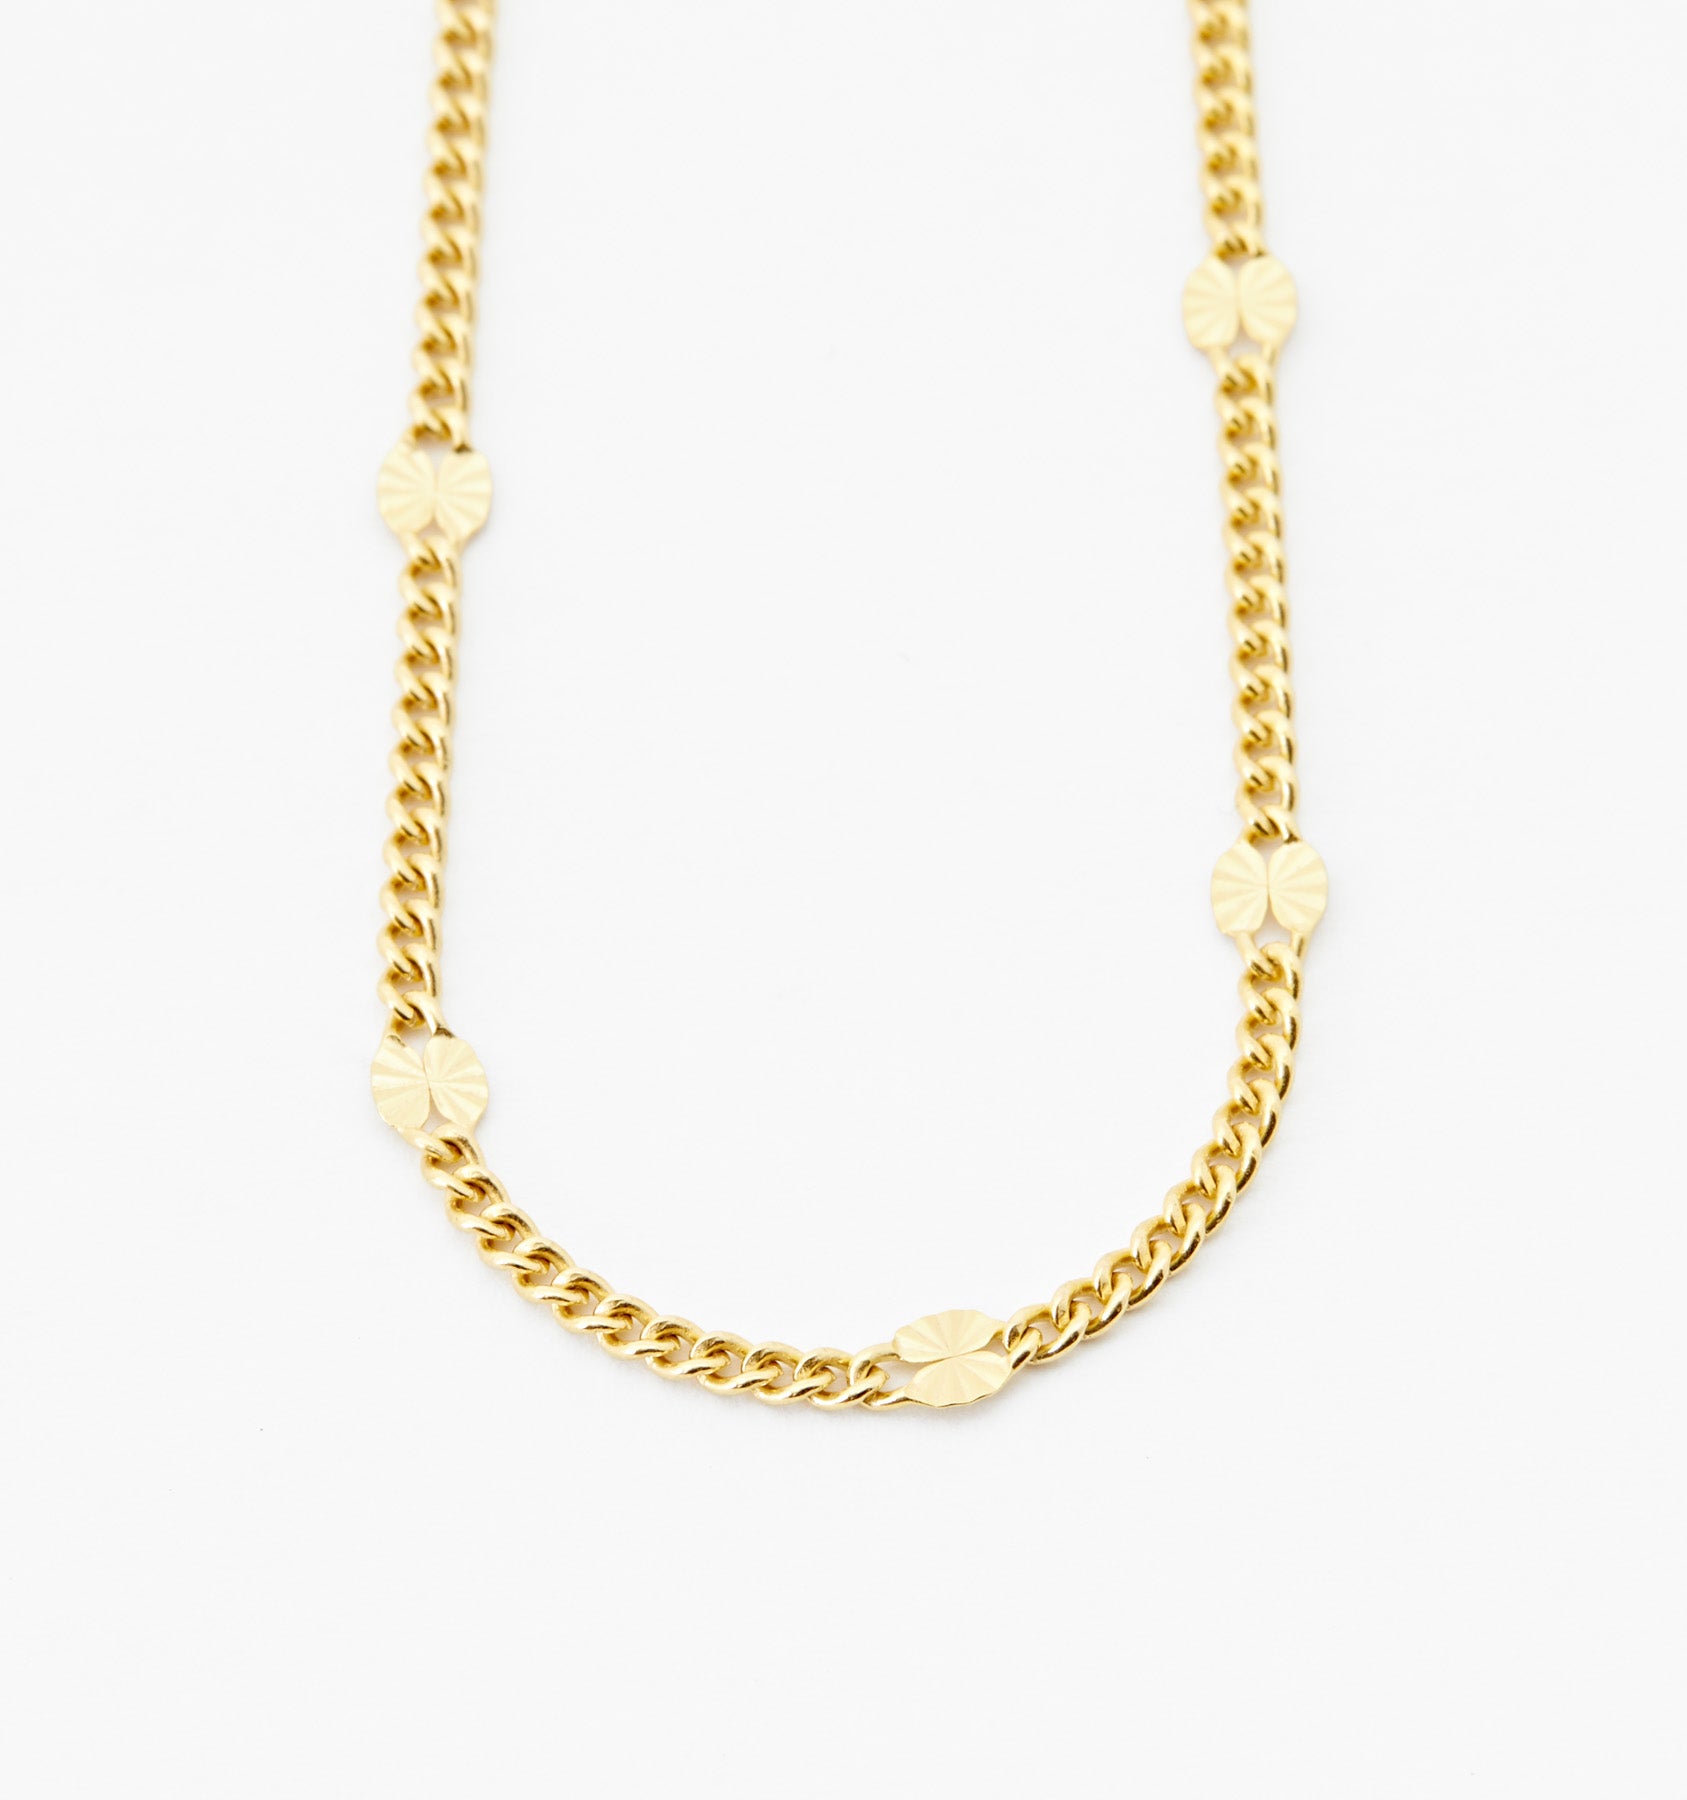 Dainty Chain Necklace Set